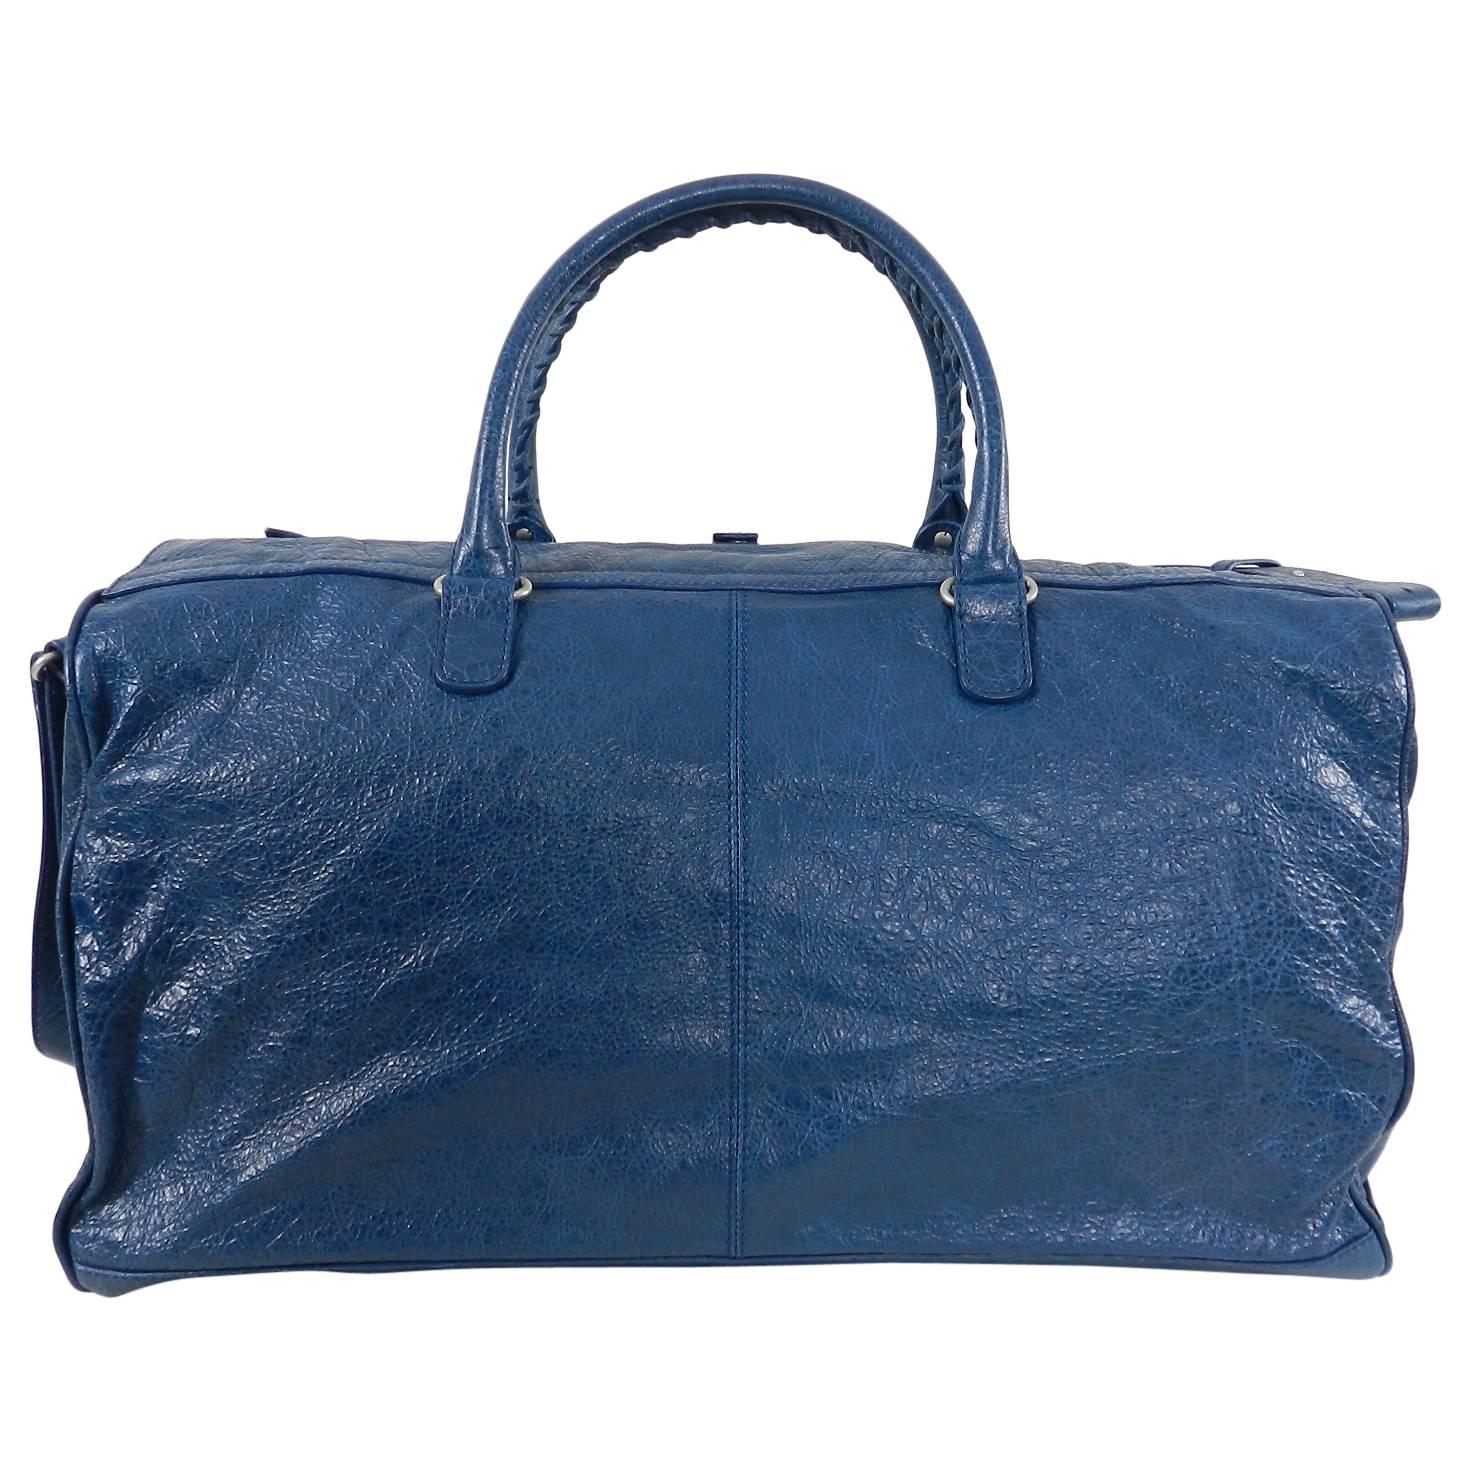 Balenciaga City Blue Giant Weekender Overnight Duffle Bag.  Blue leather bag with silvertone hardware and studs.  Double braided handles, long shoulder strap, roomy interior.  Excellent clean pre-owned condition with no significant wear to note. The